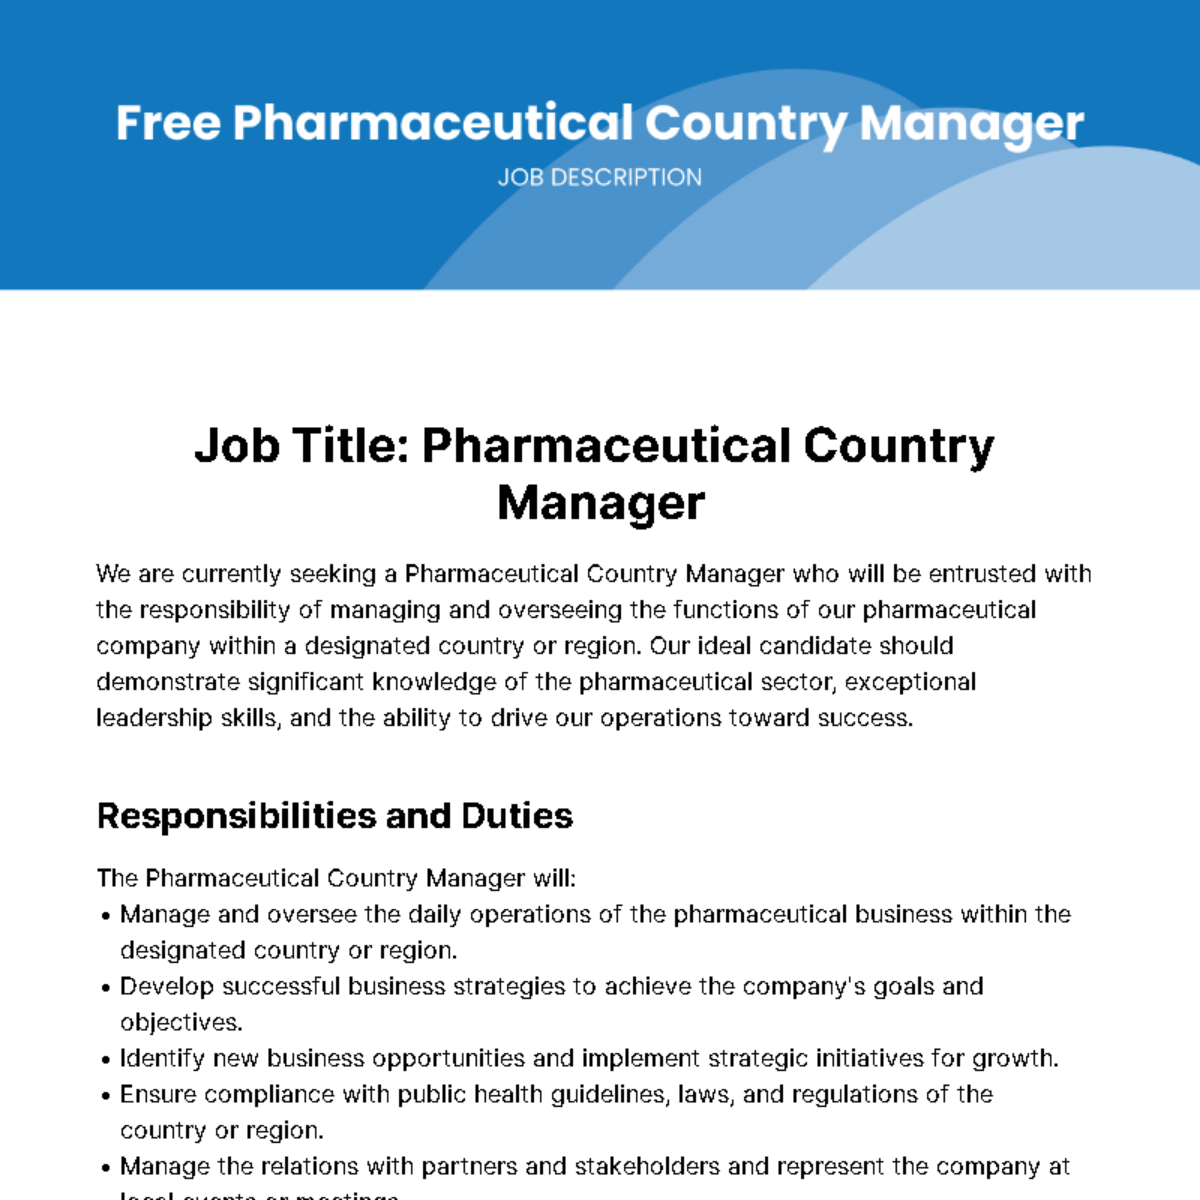 Free Pharmaceutical Country Manager Job Description Template